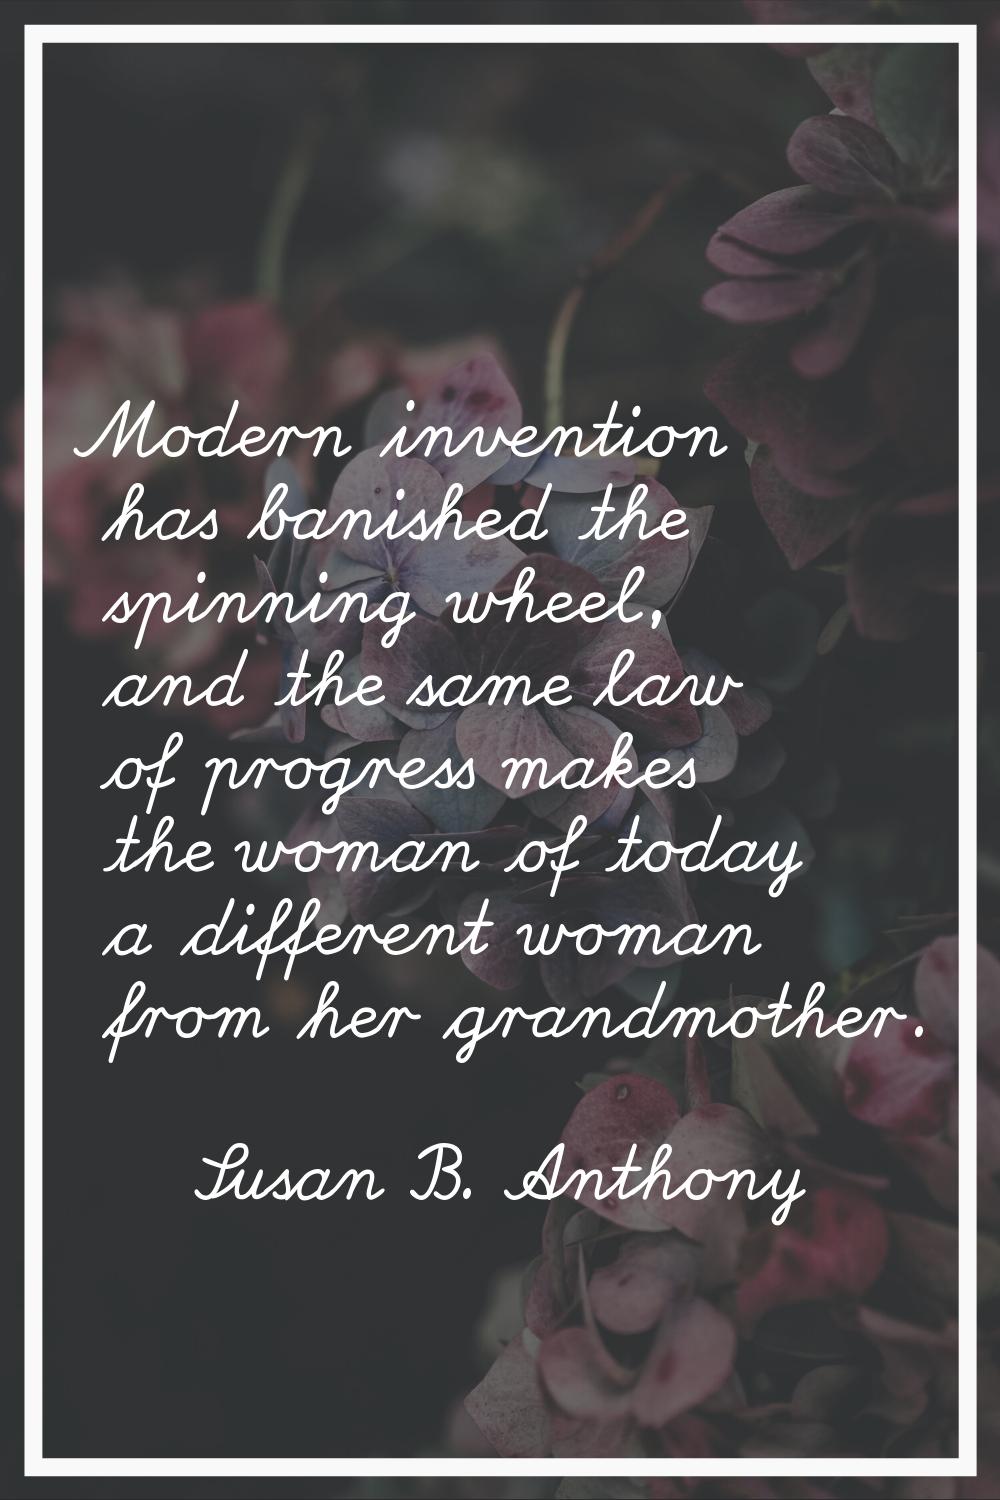 Modern invention has banished the spinning wheel, and the same law of progress makes the woman of t